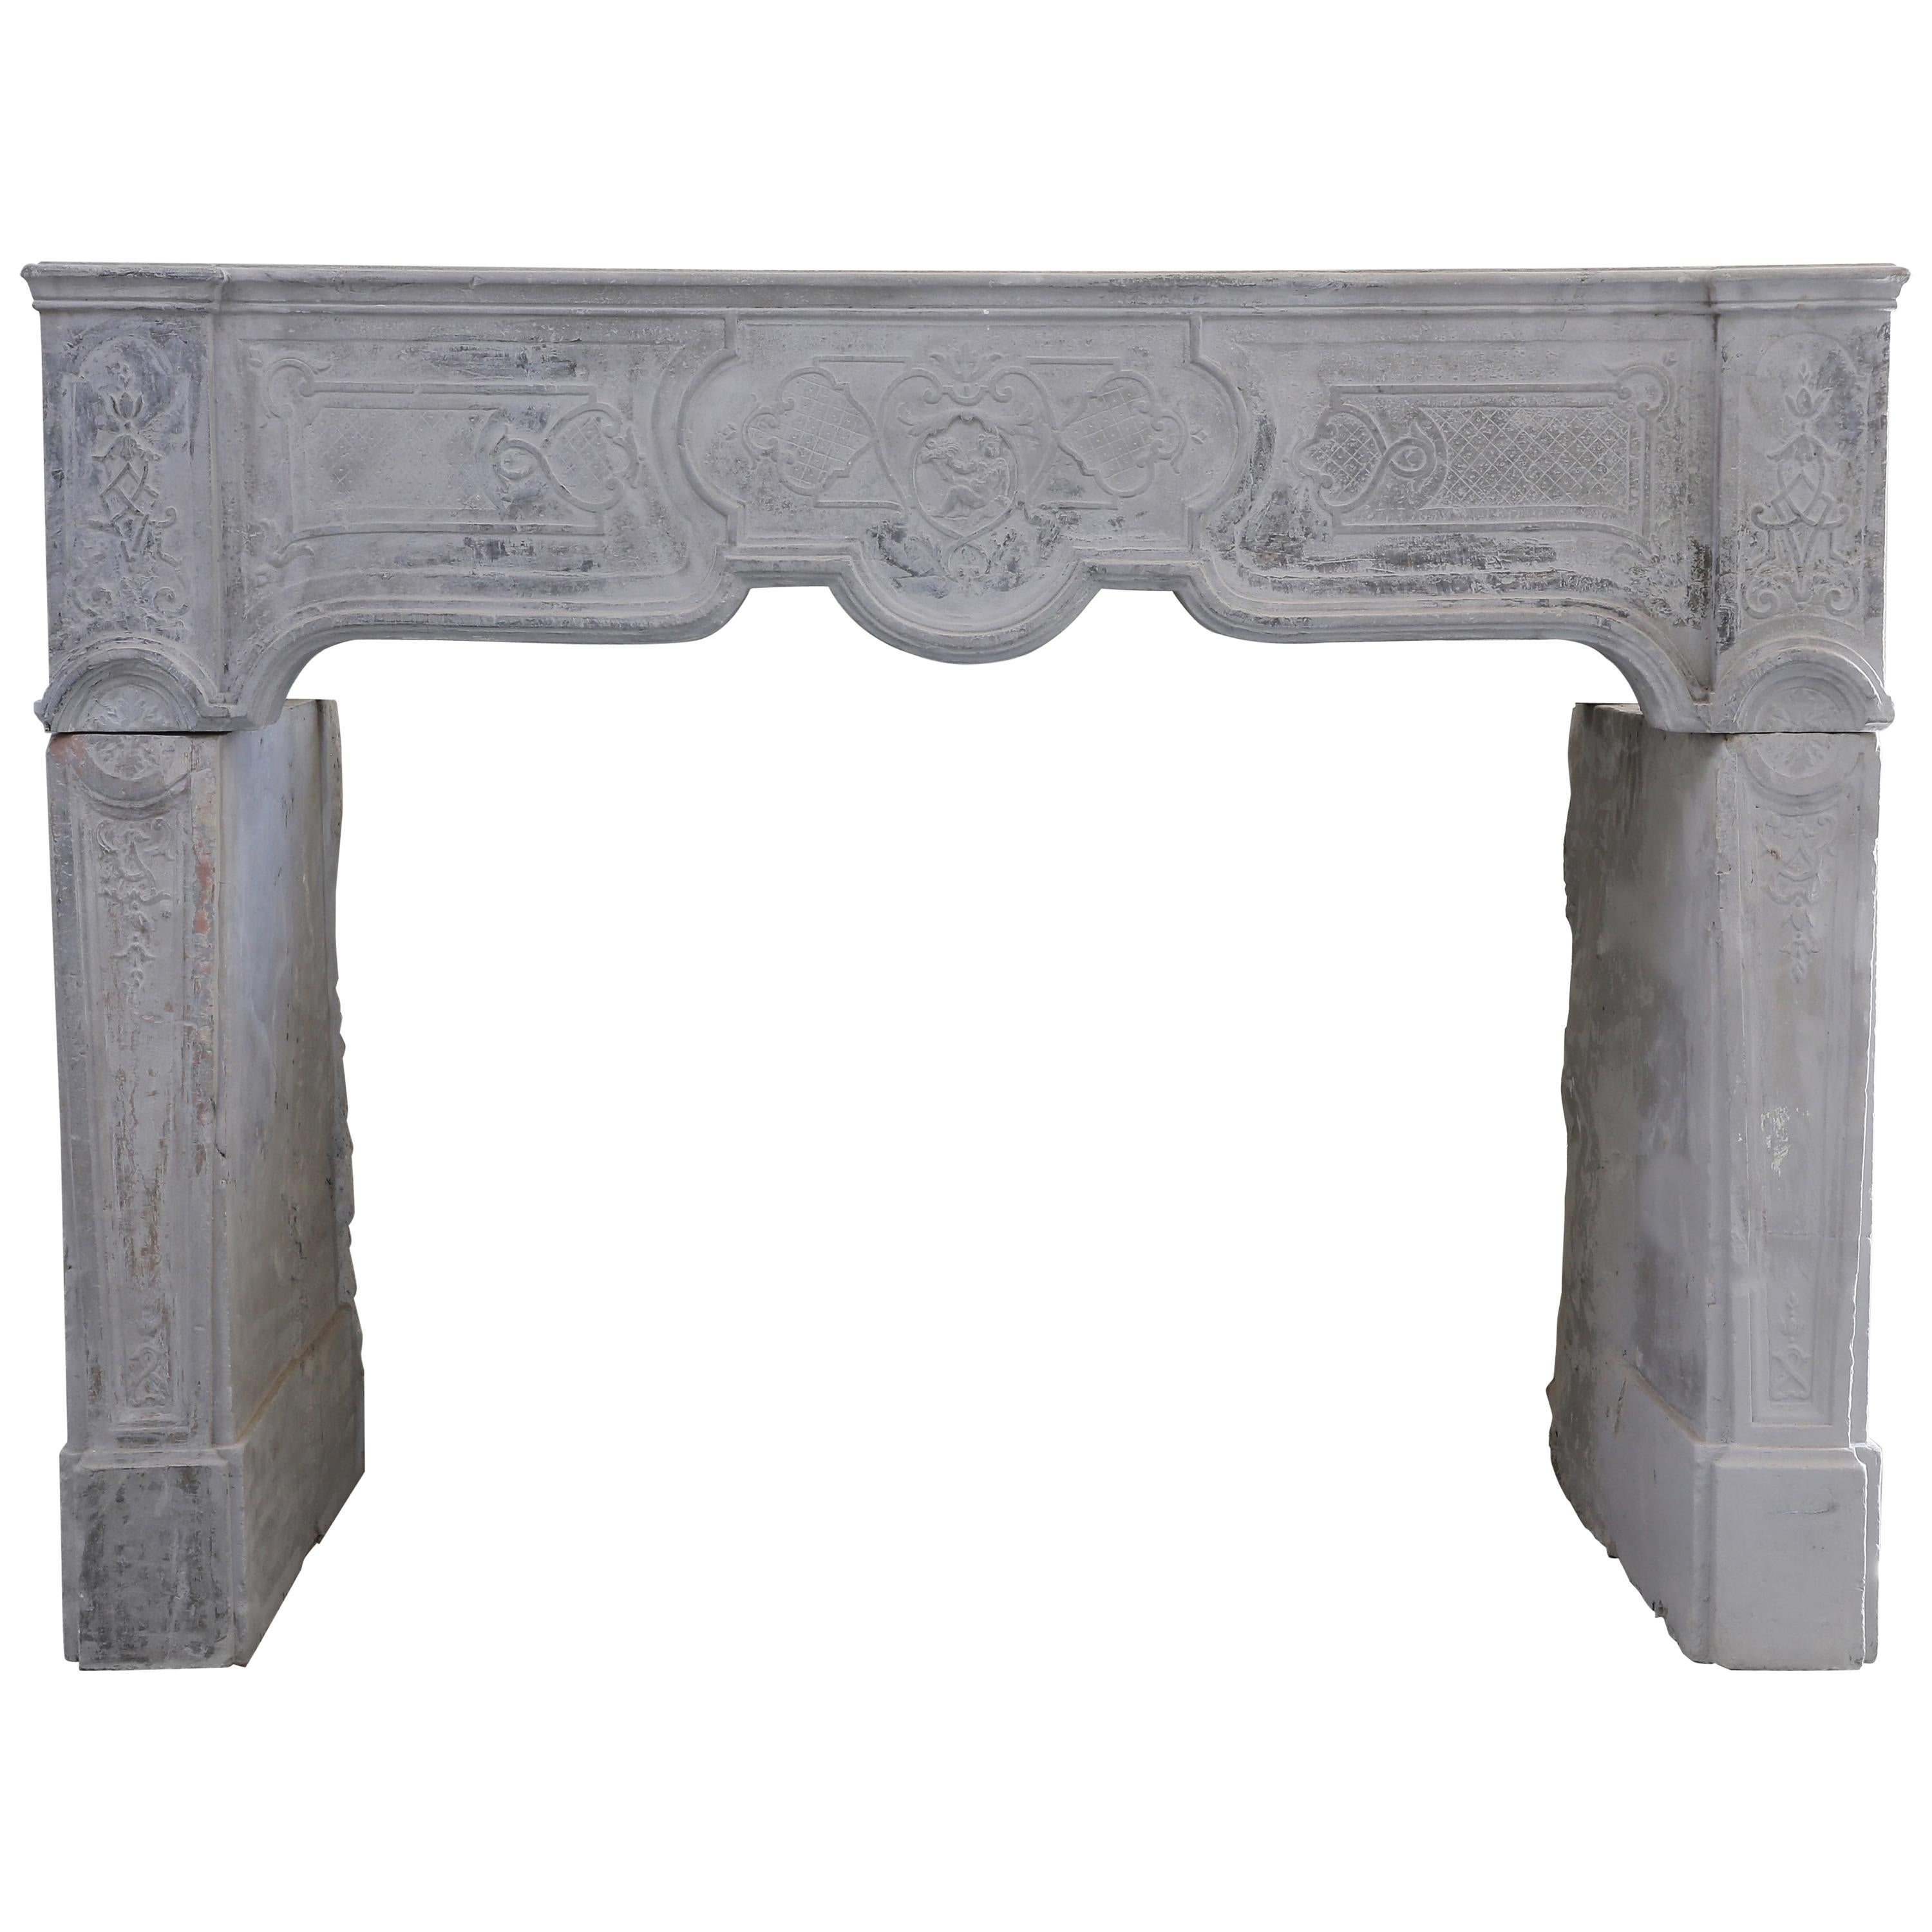 Louis XV Mantel Piece from the 19th Century